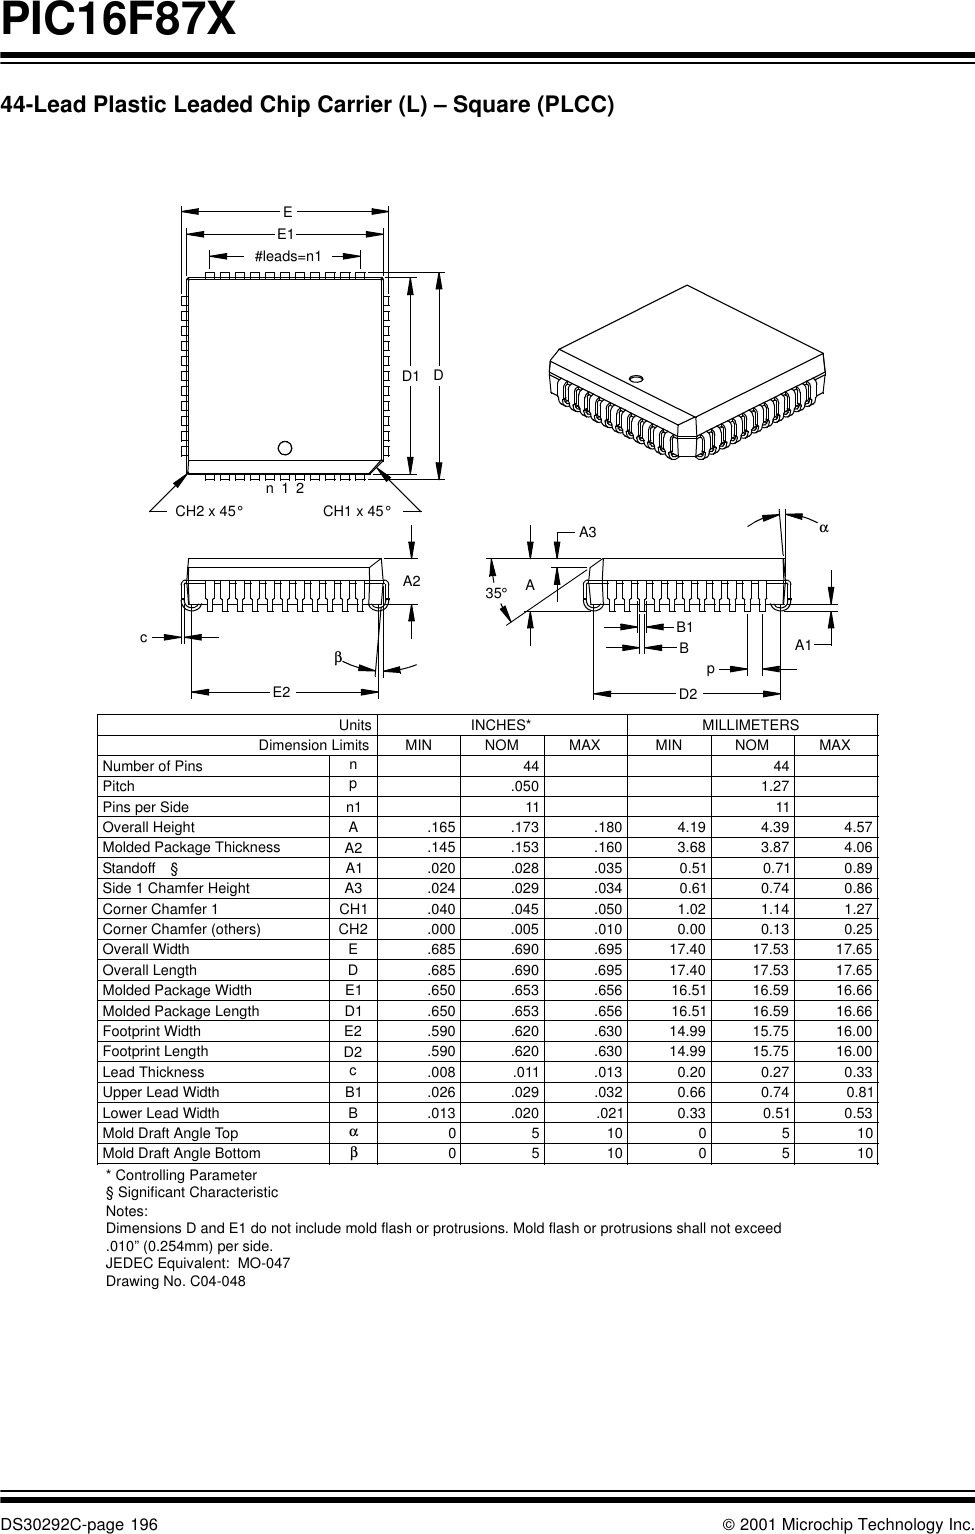 PIC16F87XDS30292C-page 196  2001 Microchip Technology Inc.44-Lead Plastic Leaded Chip Carrier (L) – Square (PLCC)CH2 x 45°CH1 x 45°10501050βMold Draft Angle Bottom10501050αMold Draft Angle Top0.530.510.33.021.020.013B0.810.740.66.032.029.026B1Upper Lead Width0.330.270.20.013.011.008cLead Thickness1111n1Pins per Side16.0015.7514.99.630.620.590D2Footprint Length16.0015.7514.99.630.620.590E2Footprint Width16.6616.5916.51.656.653.650D1Molded Package Length16.6616.5916.51.656.653.650E1Molded Package Width17.6517.5317.40.695.690.685DOverall Length17.6517.5317.40.695.690.685EOverall Width0.250.130.00.010.005.000CH2Corner Chamfer (others)1.271.141.02.050.045.040CH1Corner Chamfer 10.860.740.61.034.029.024A3Side 1 Chamfer Height0.51.020A1Standoff §A2Molded Package Thickness4.574.394.19.180.173.165AOverall Height1.27.050pPitch4444nNumber of PinsMAXNOMMINMAXNOMMINDimension LimitsMILLIMETERSINCHES*UnitsβA2cE22DD1n#leads=n1EE11αpA3A35°B1BD2A1.145 .153 .160 3.68 3.87 4.06.028 .035 0.71 0.89Lower Lead Width* Controlling ParameterNotes:Dimensions D and E1 do not include mold flash or protrusions. Mold flash or protrusions shall not exceed .010” (0.254mm) per side.JEDEC Equivalent:  MO-047Drawing No. C04-048§ Significant Characteristic